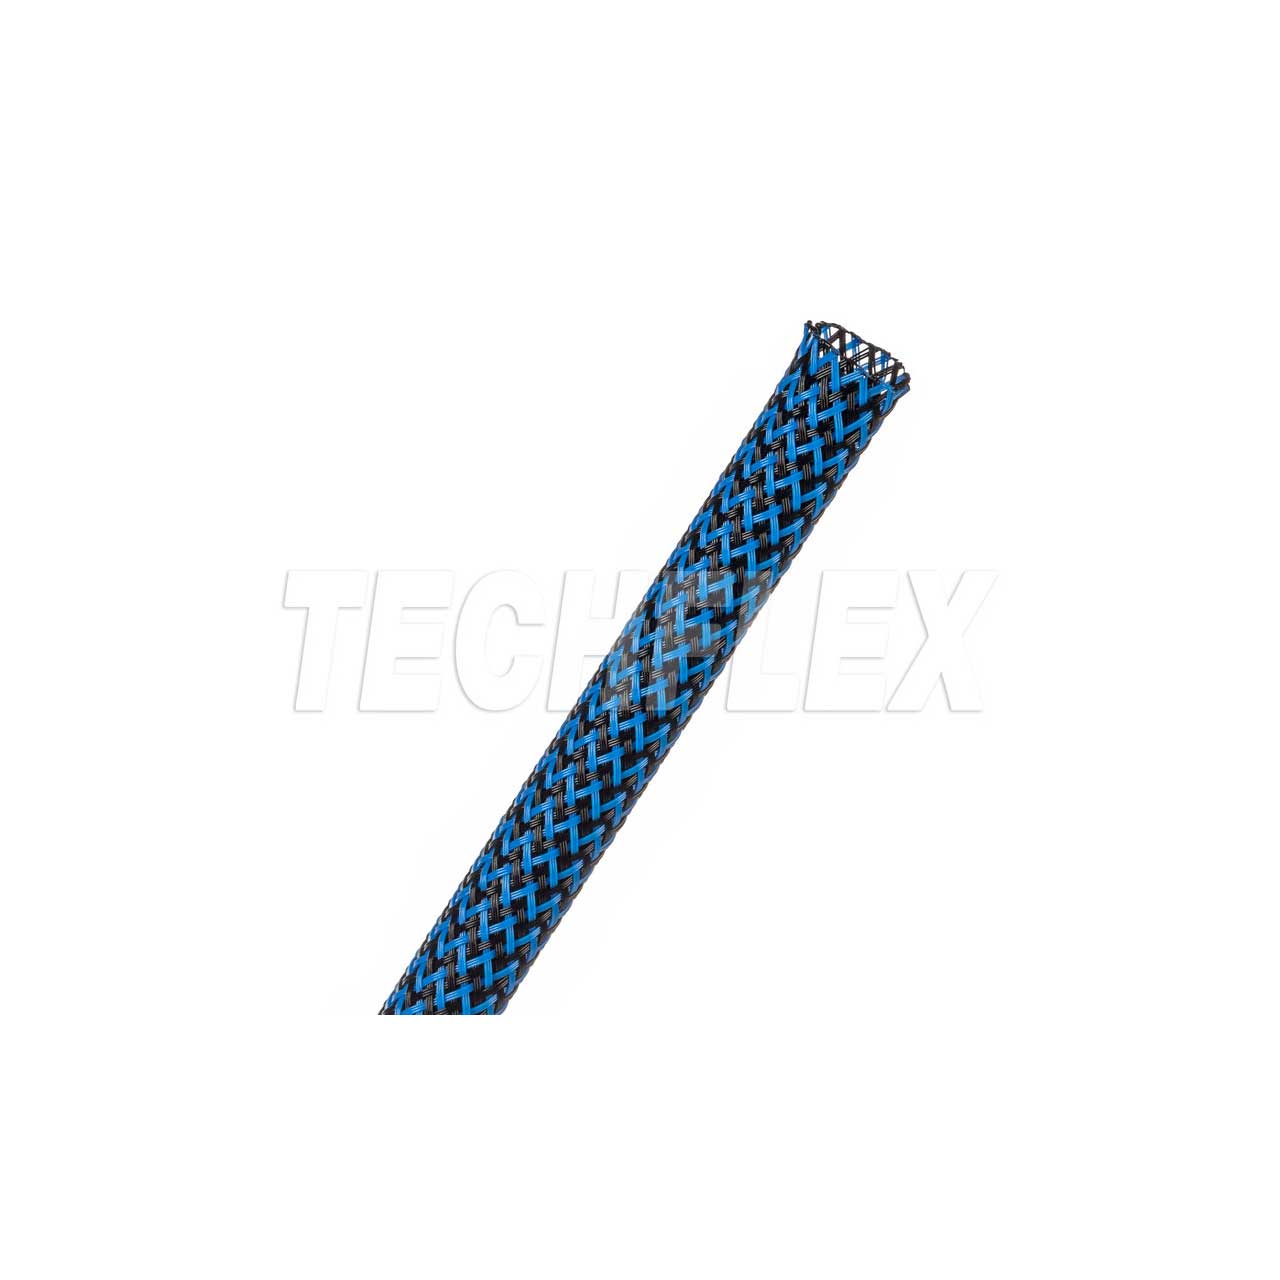 Techflex PTT0.31BNB Tight Weave 5/16 Inch Expandable Cable Tubing - Black with Neon Blue Tracer - 200 Foot  PTT0.31BN